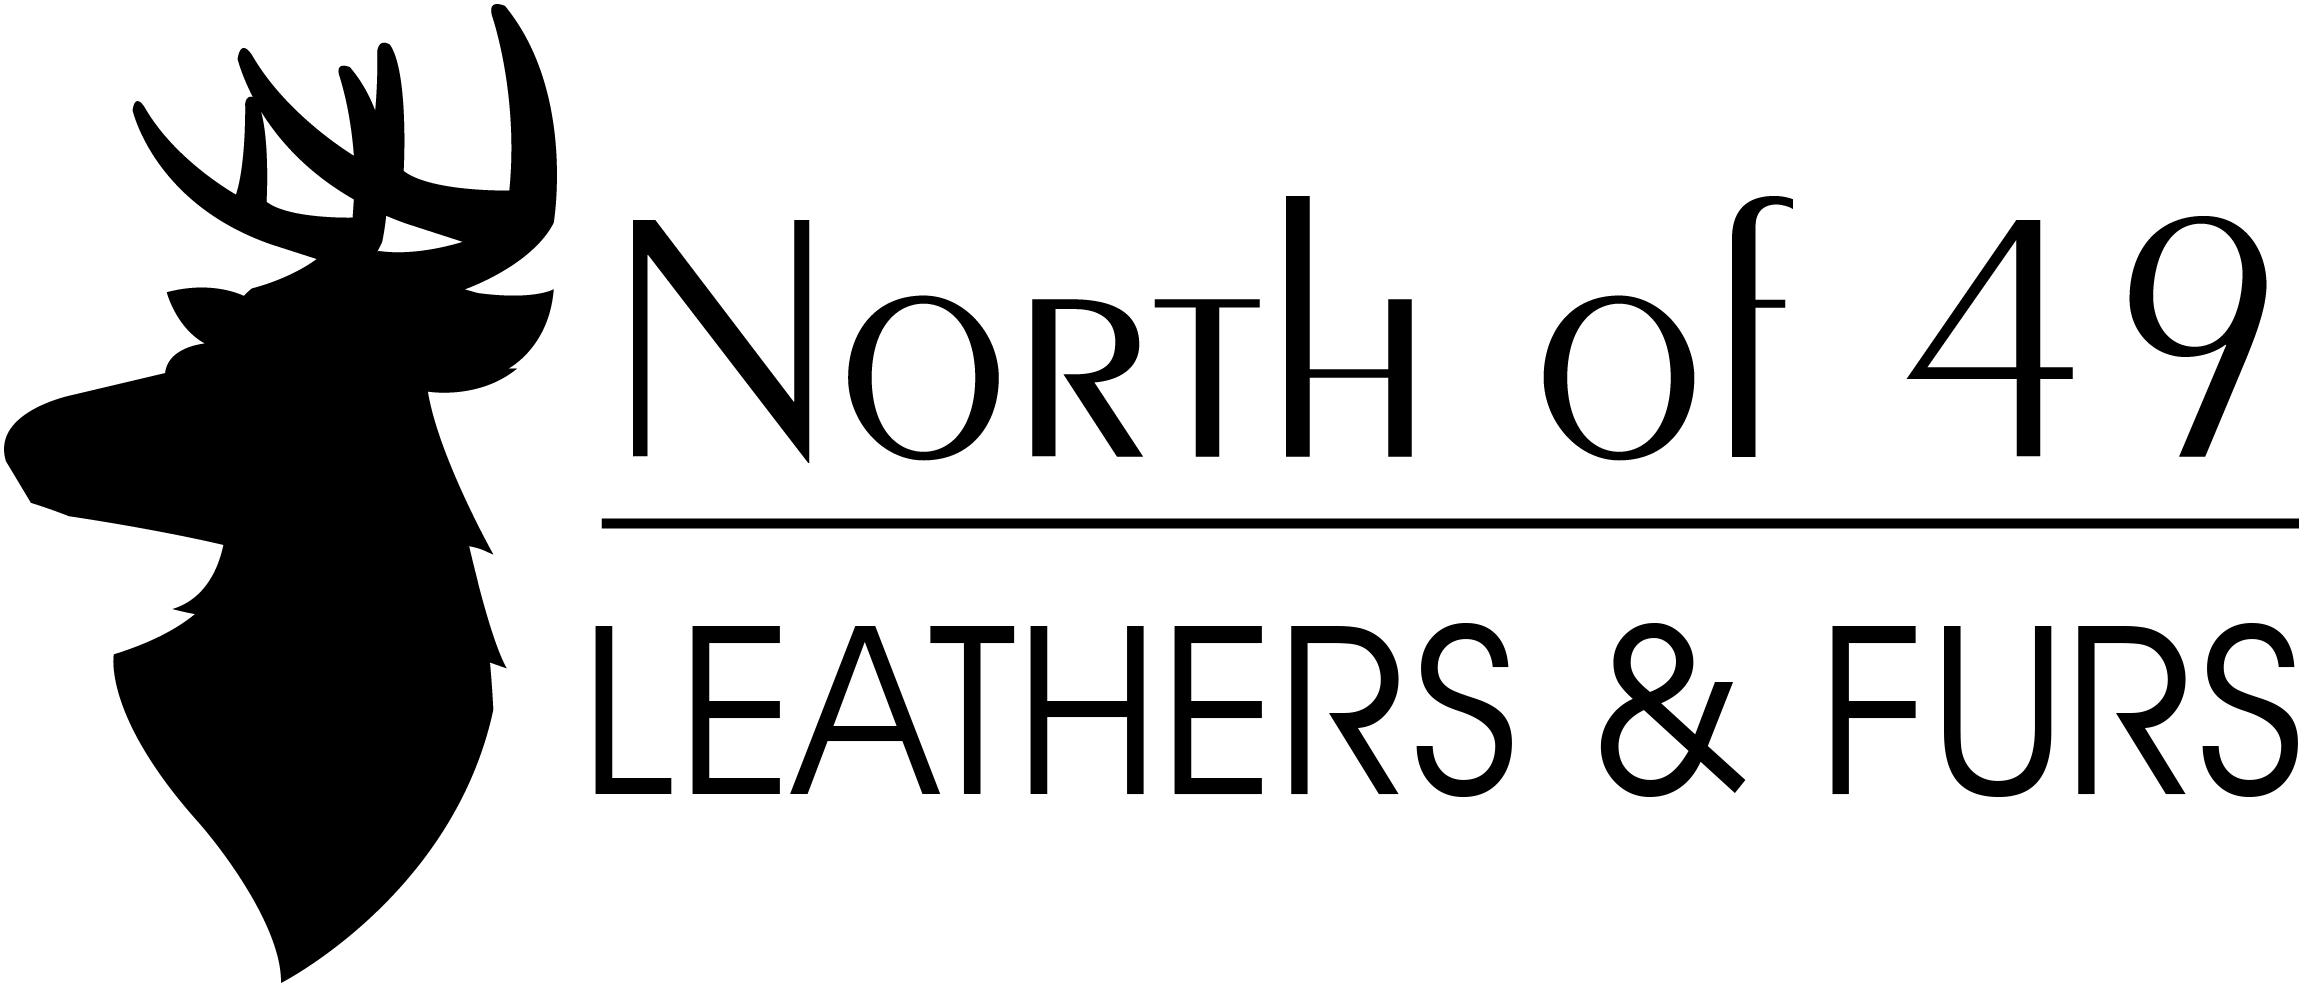 North of 49 Leathers & Furs